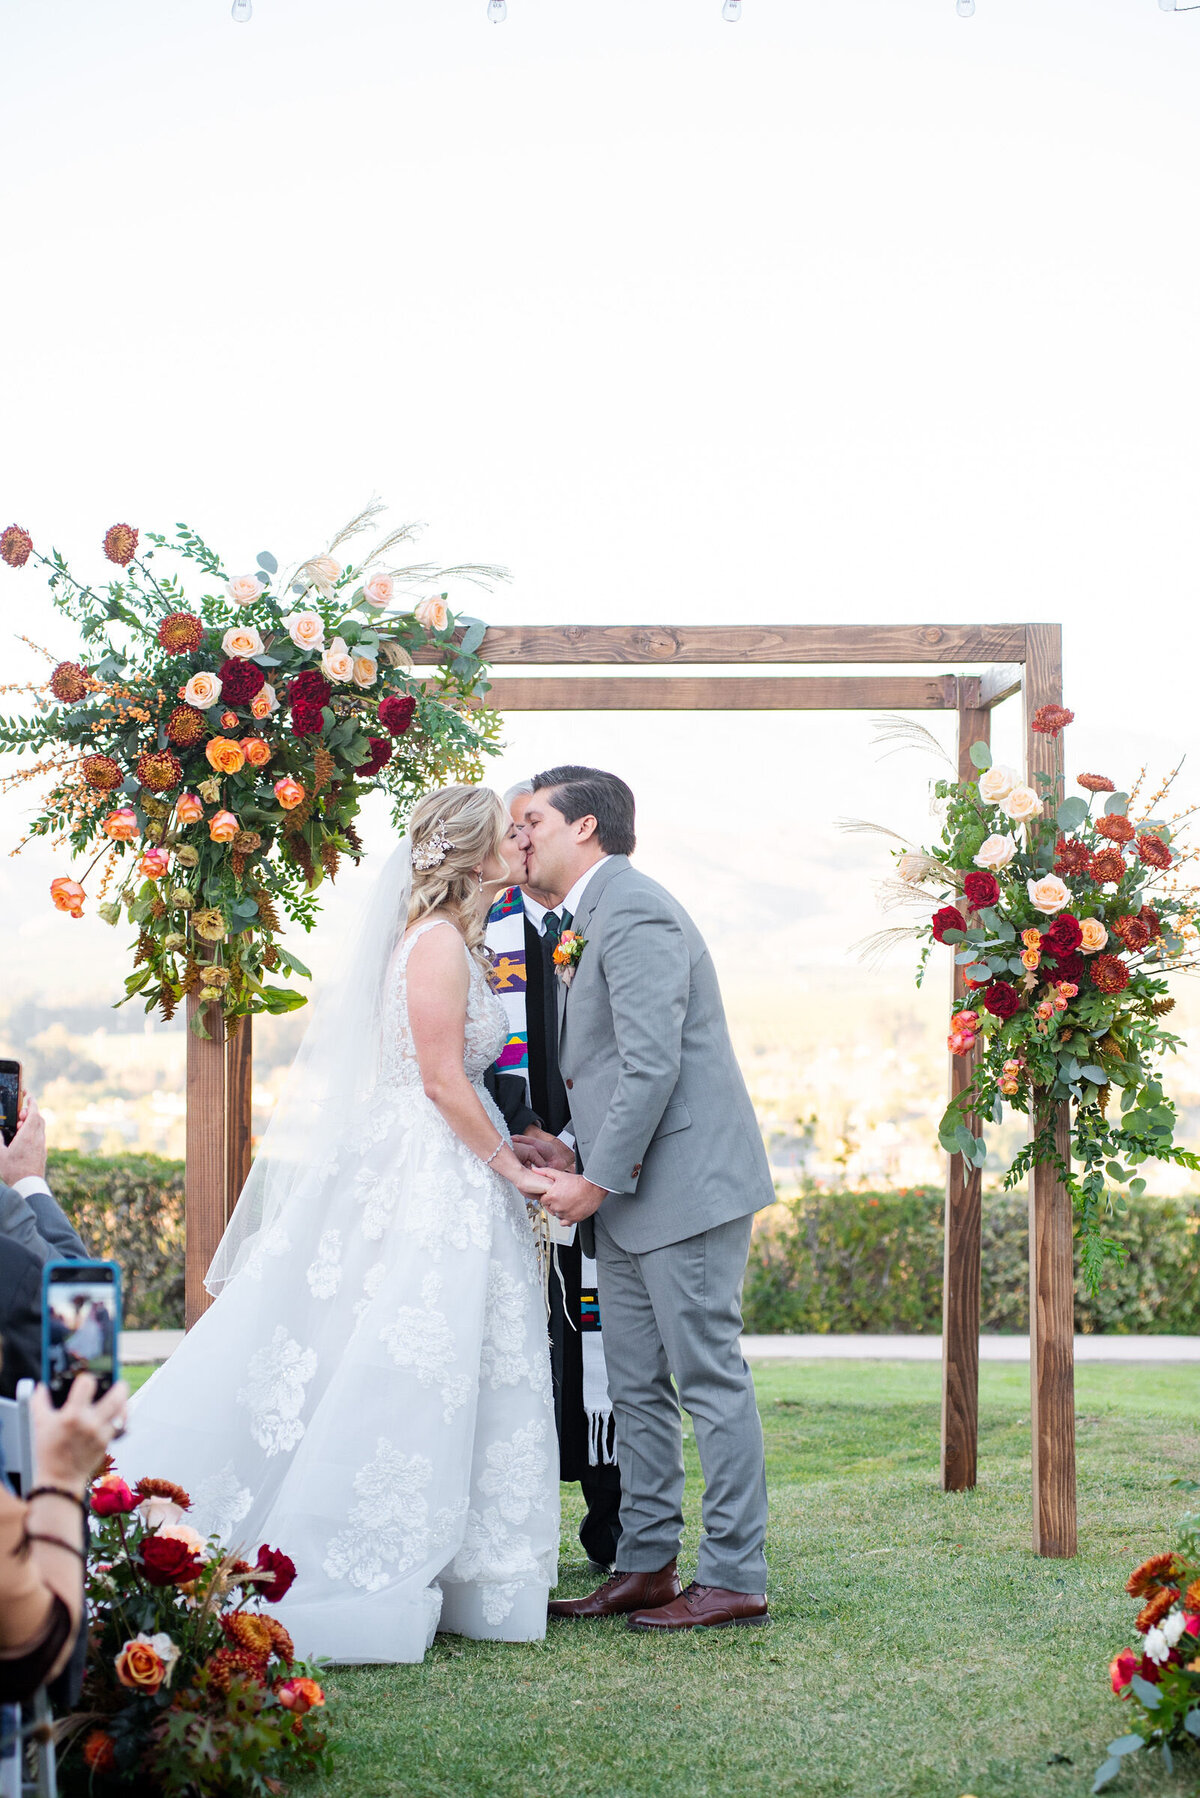 A bright and colorful wedding arbor full of bright, fresh floral bouquets/